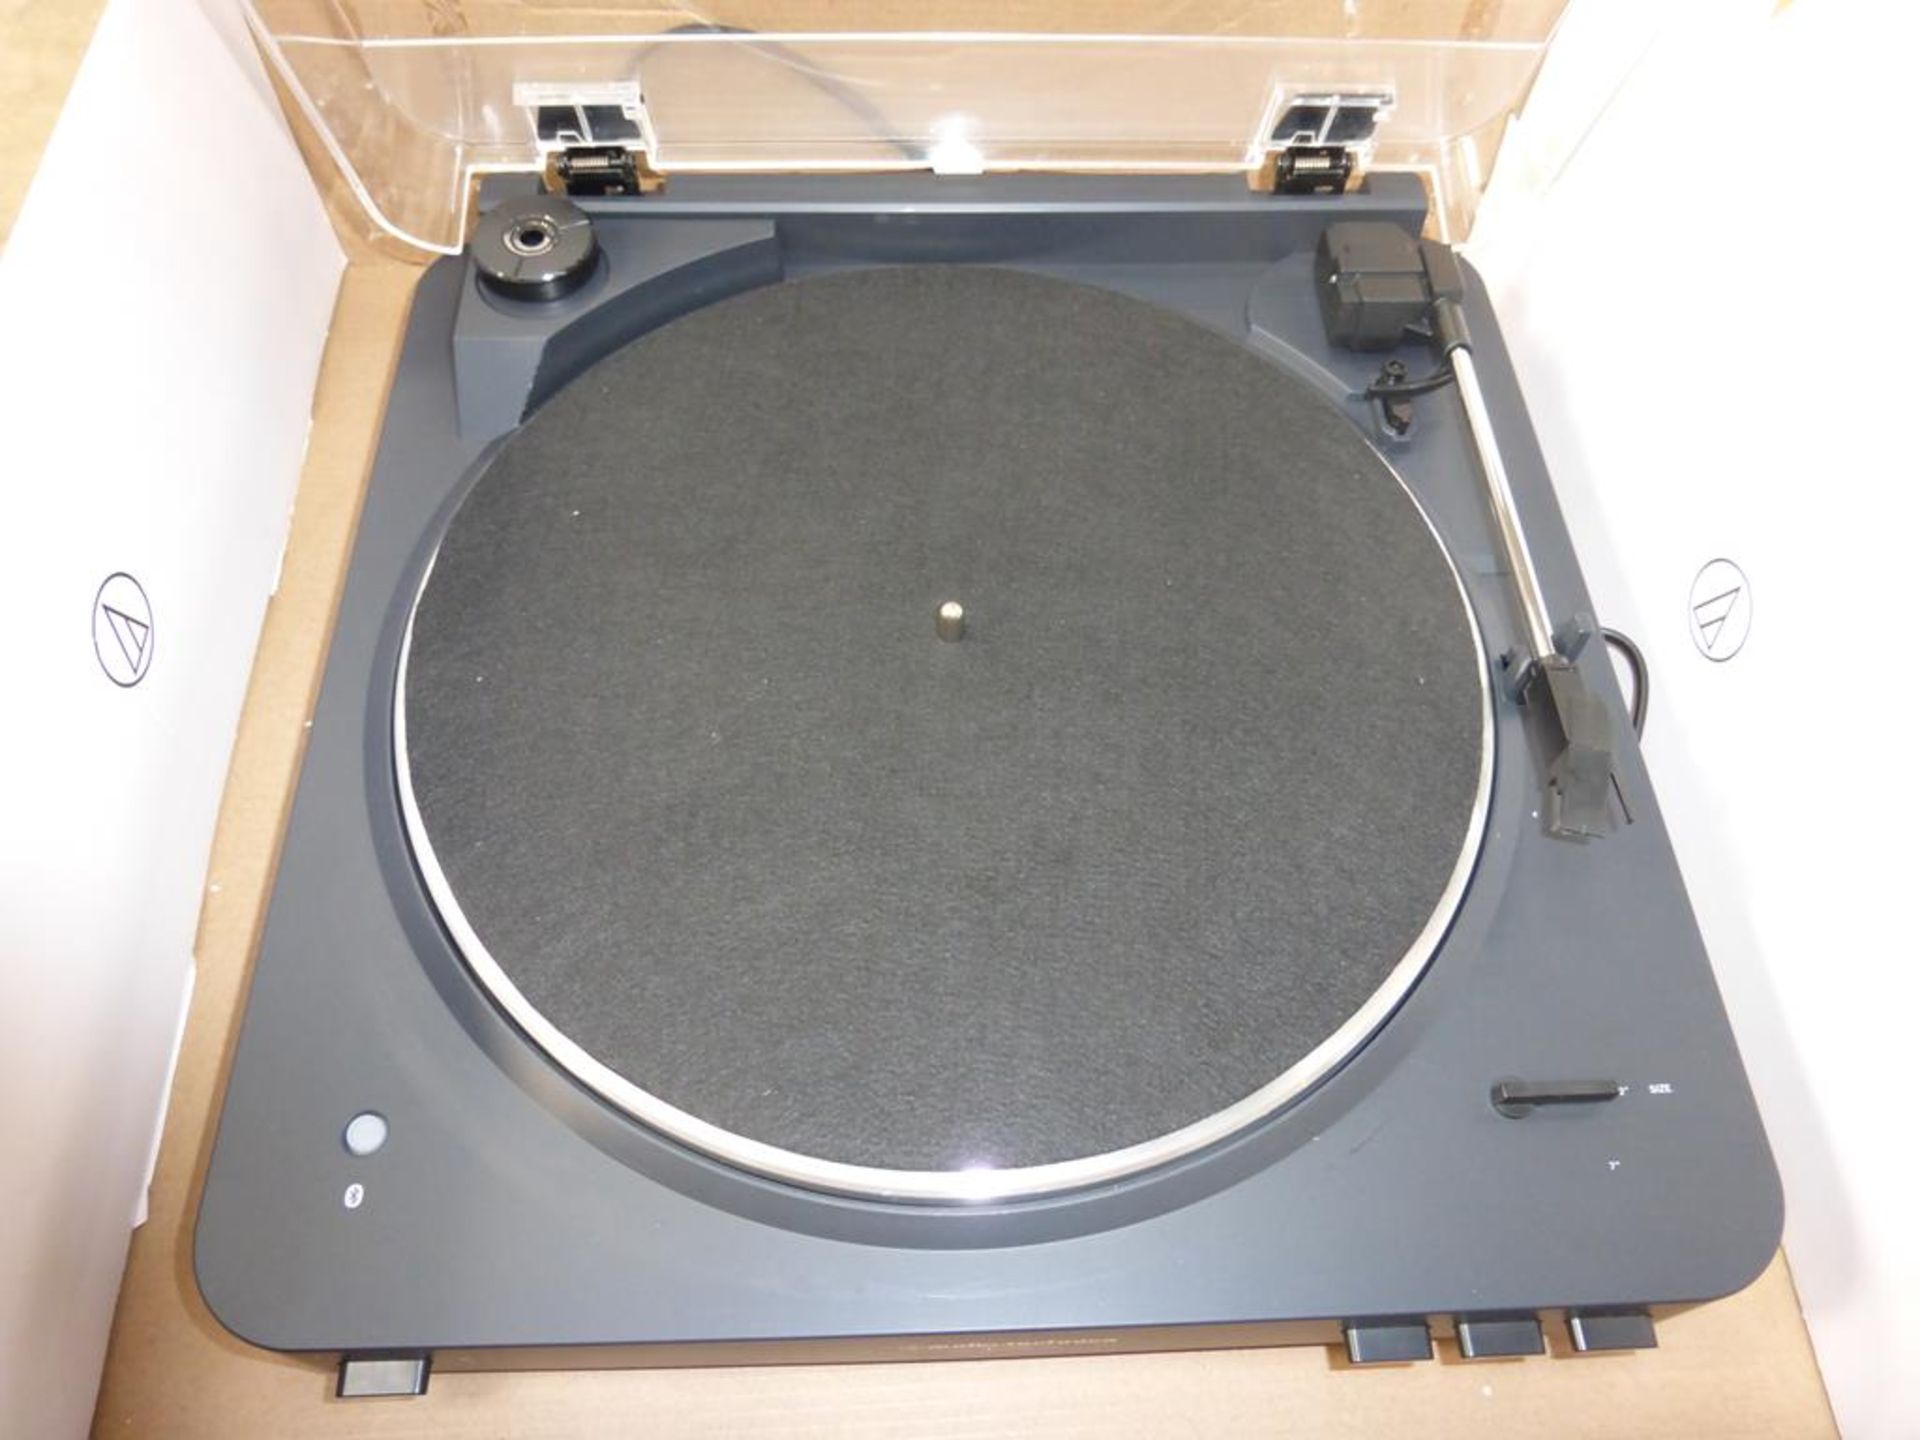 * An Audio-Technica AT-LP60BK-BT Turntable (RRP £148.95) - Image 6 of 8